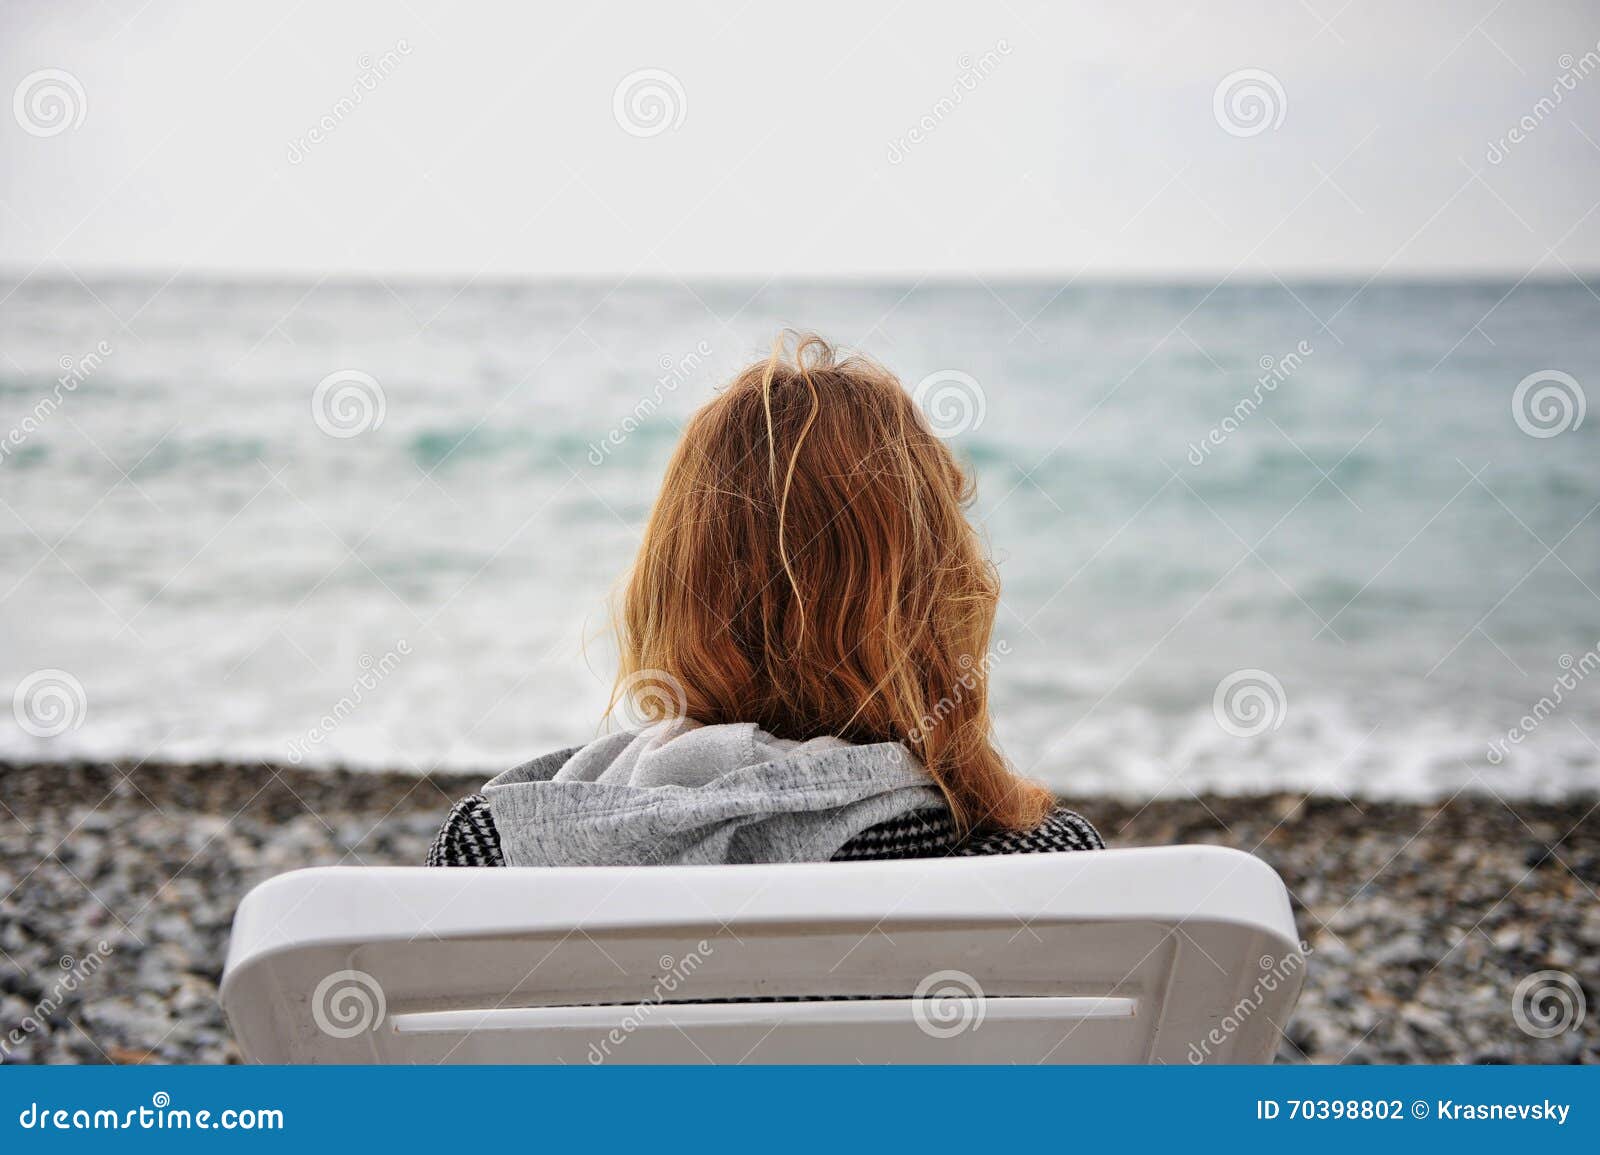 lonely girl at the sea